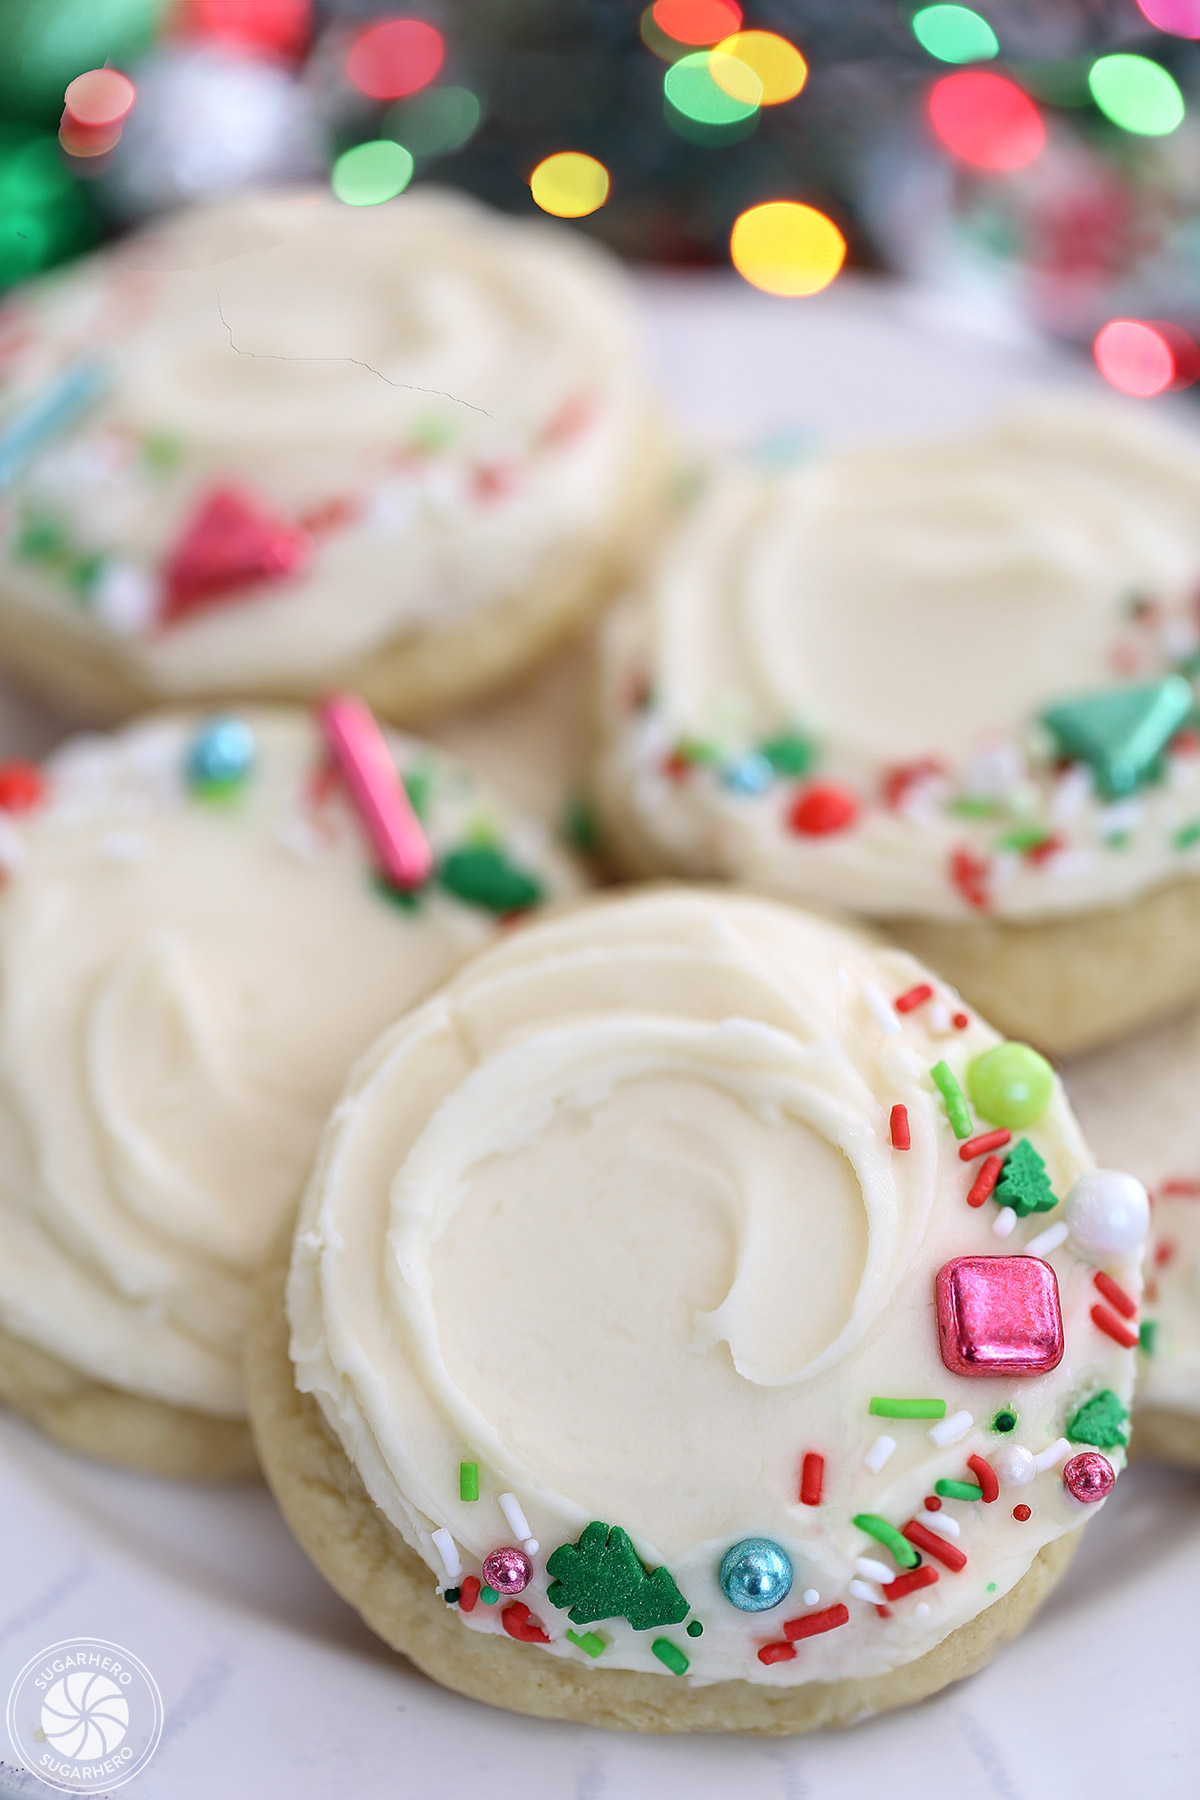 Big Soft Sugar Cookies - cookies arranged on a plate, with a bite taken out of the top cookie | From SugarHero.com